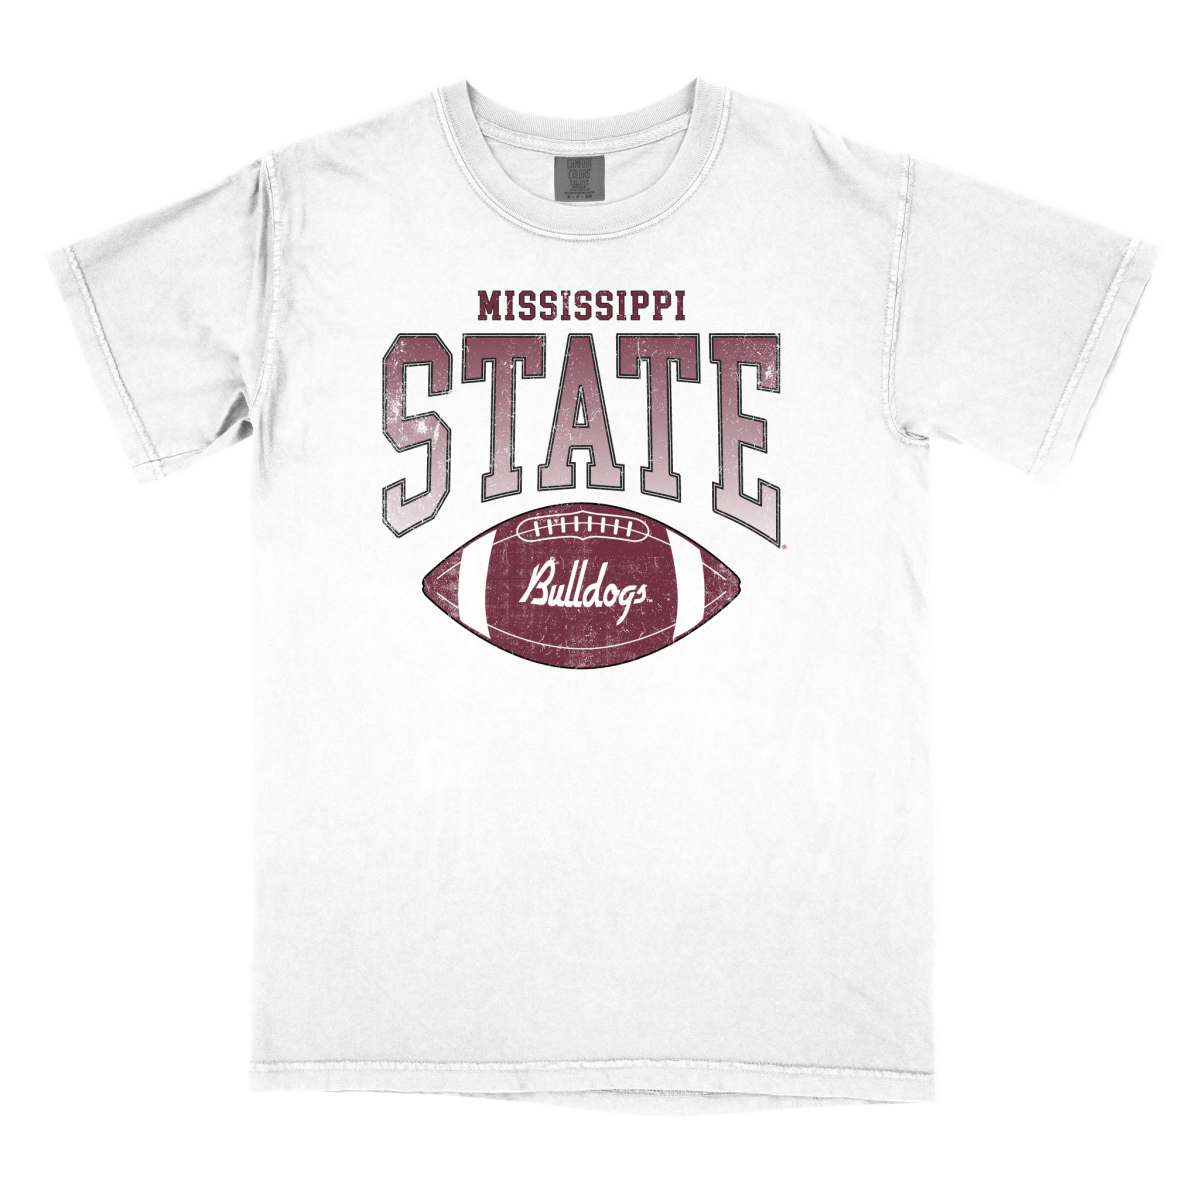 Missisippi State Hail Mary T-Shirt - Shop B-Unlimited